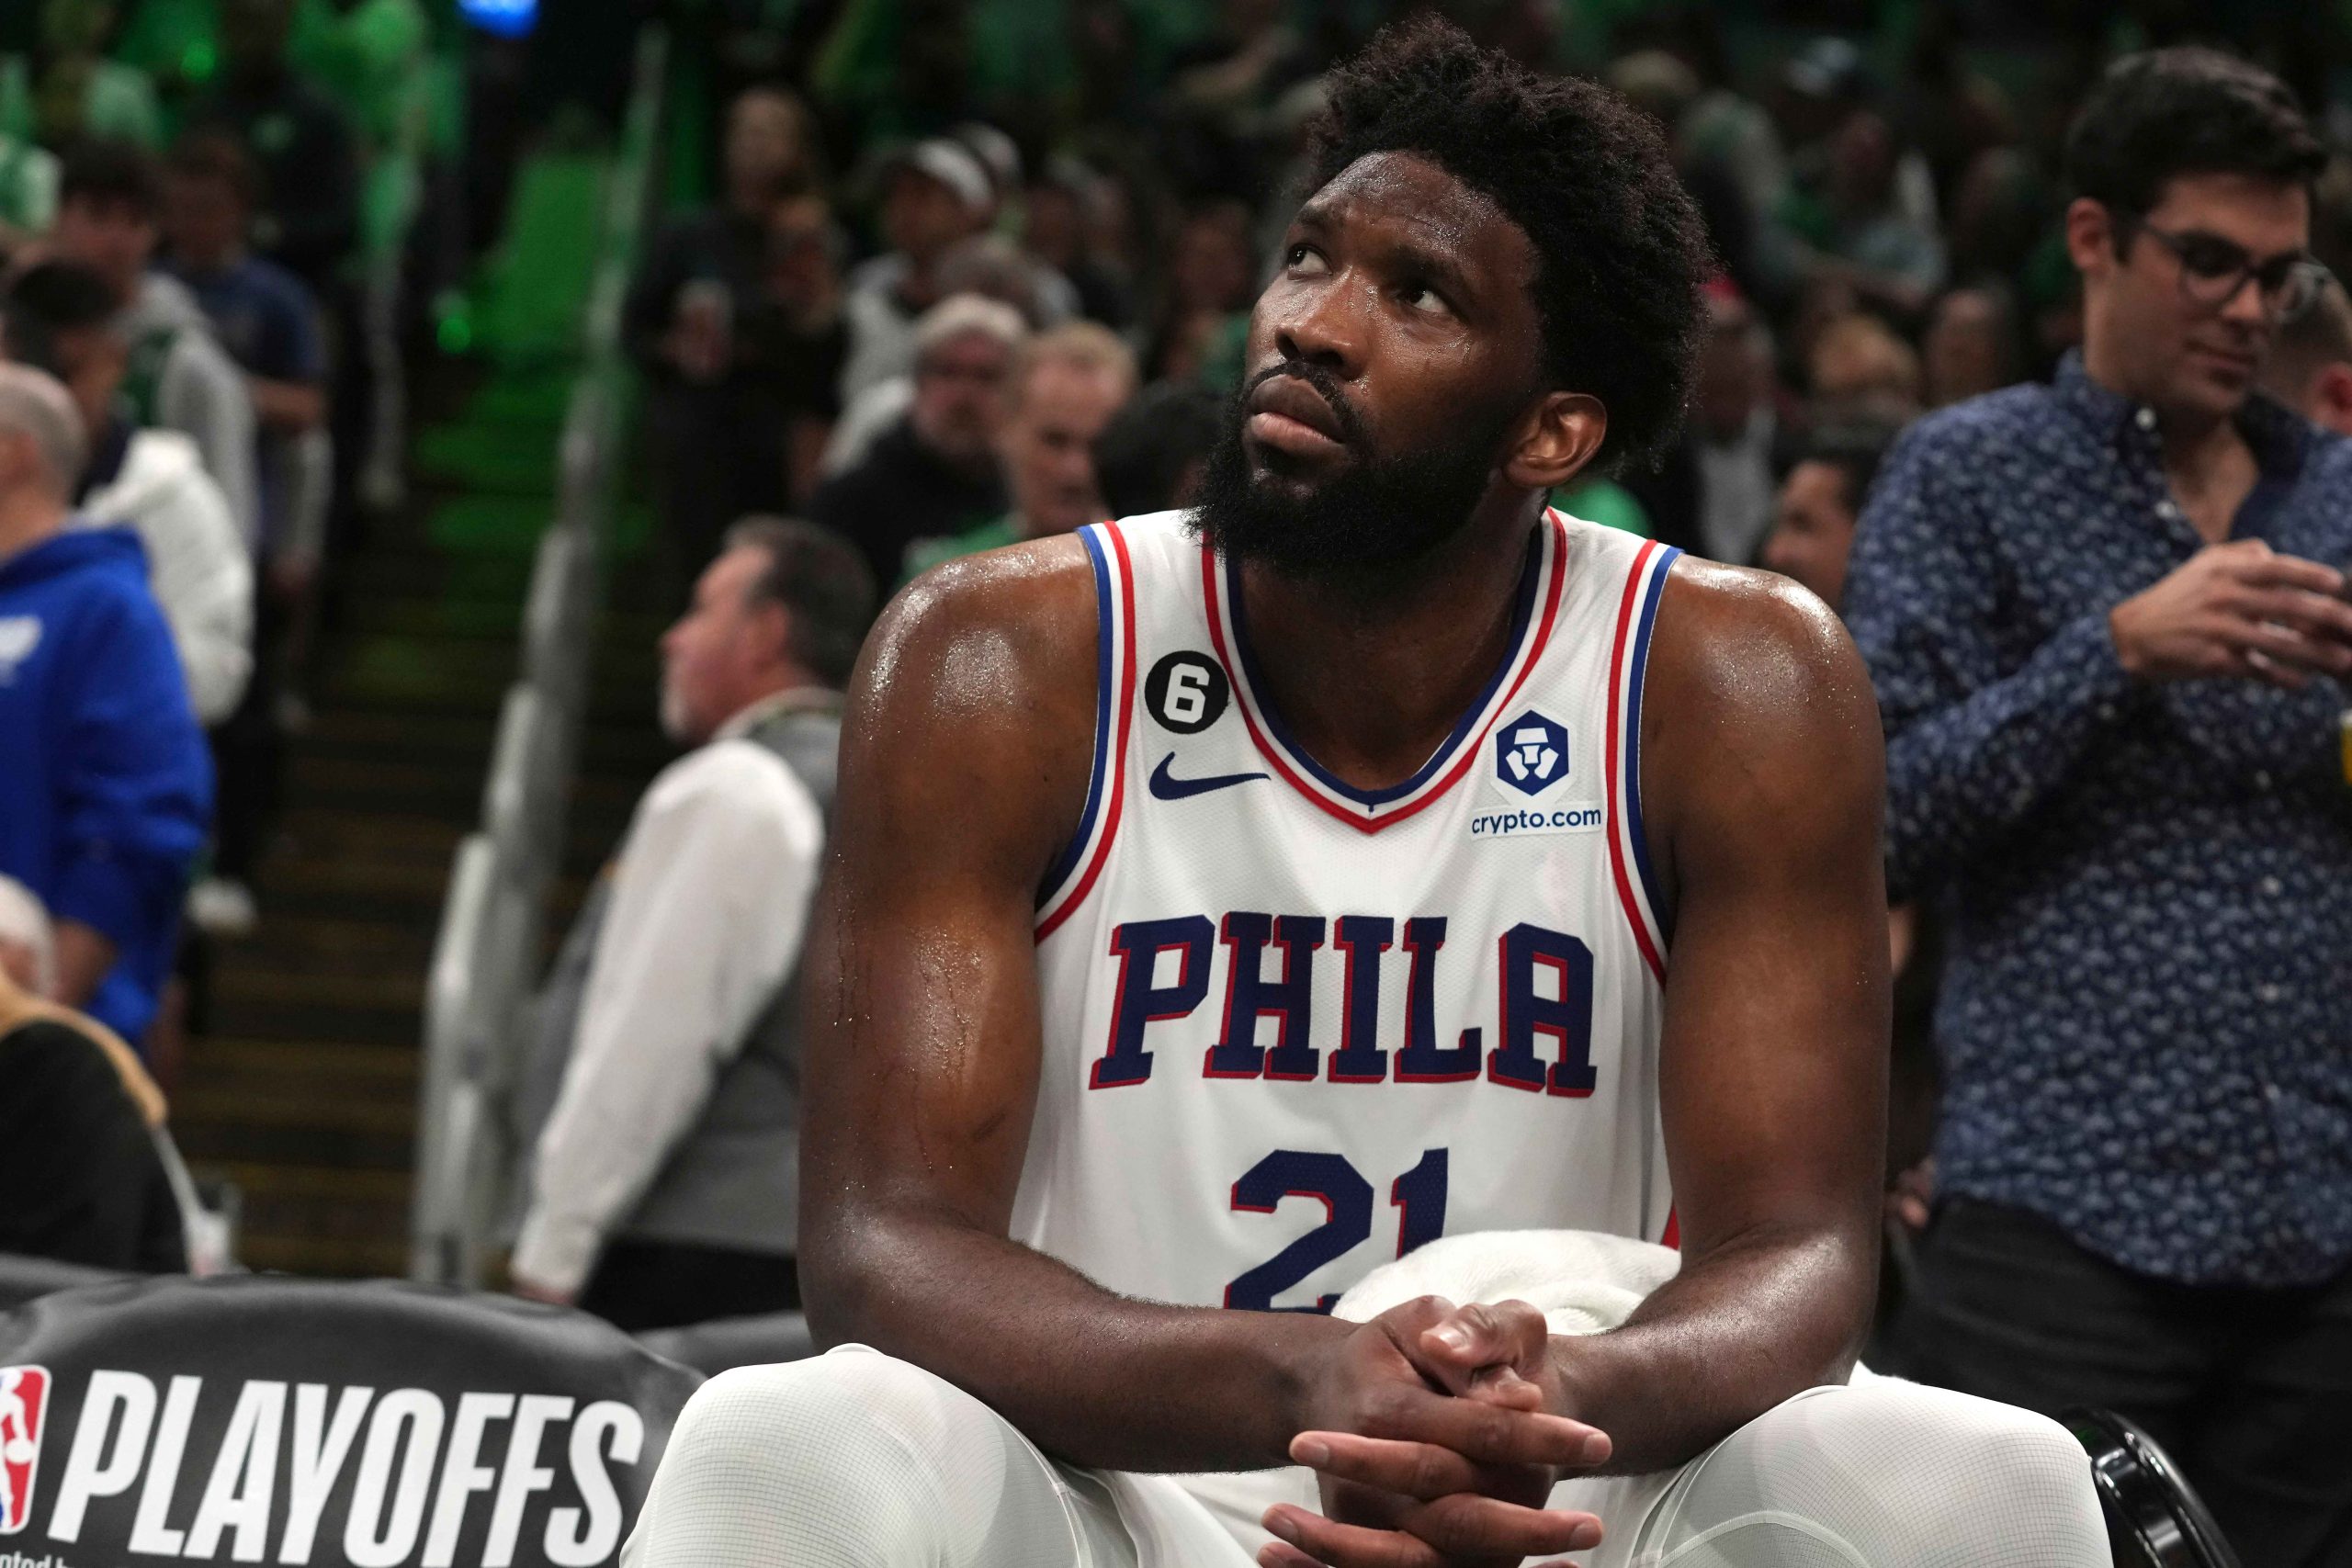 NBA Insider Predicts 76ers Star Joel Embiid Eyeing a Trade Move Soon